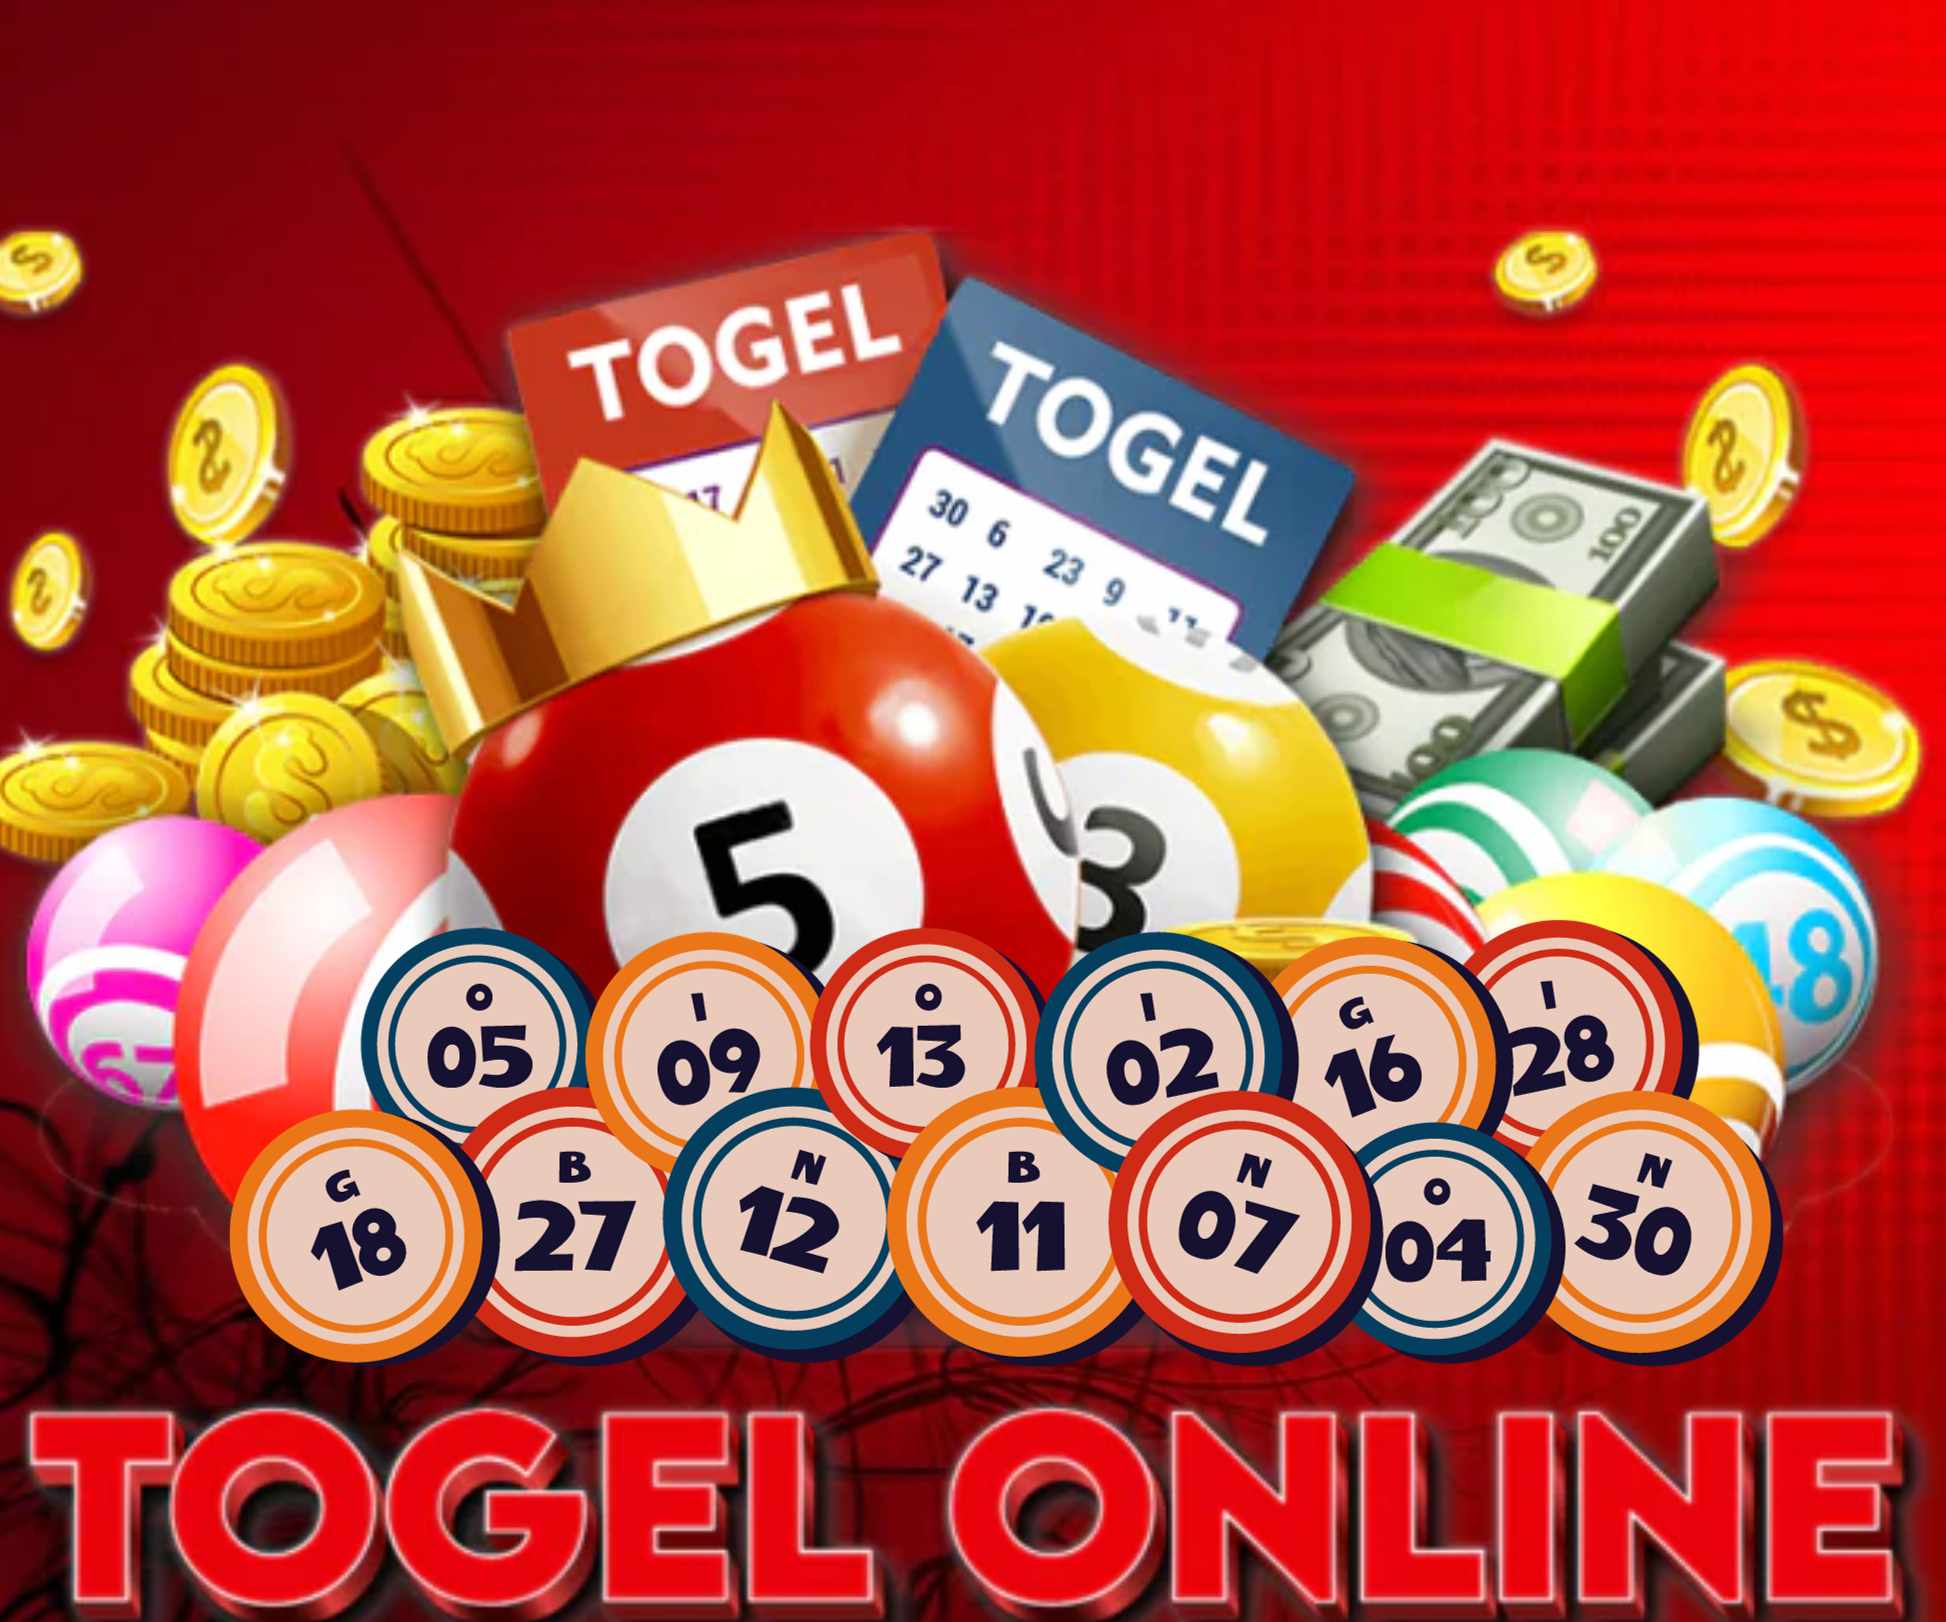 Togel has interesting features to win easily